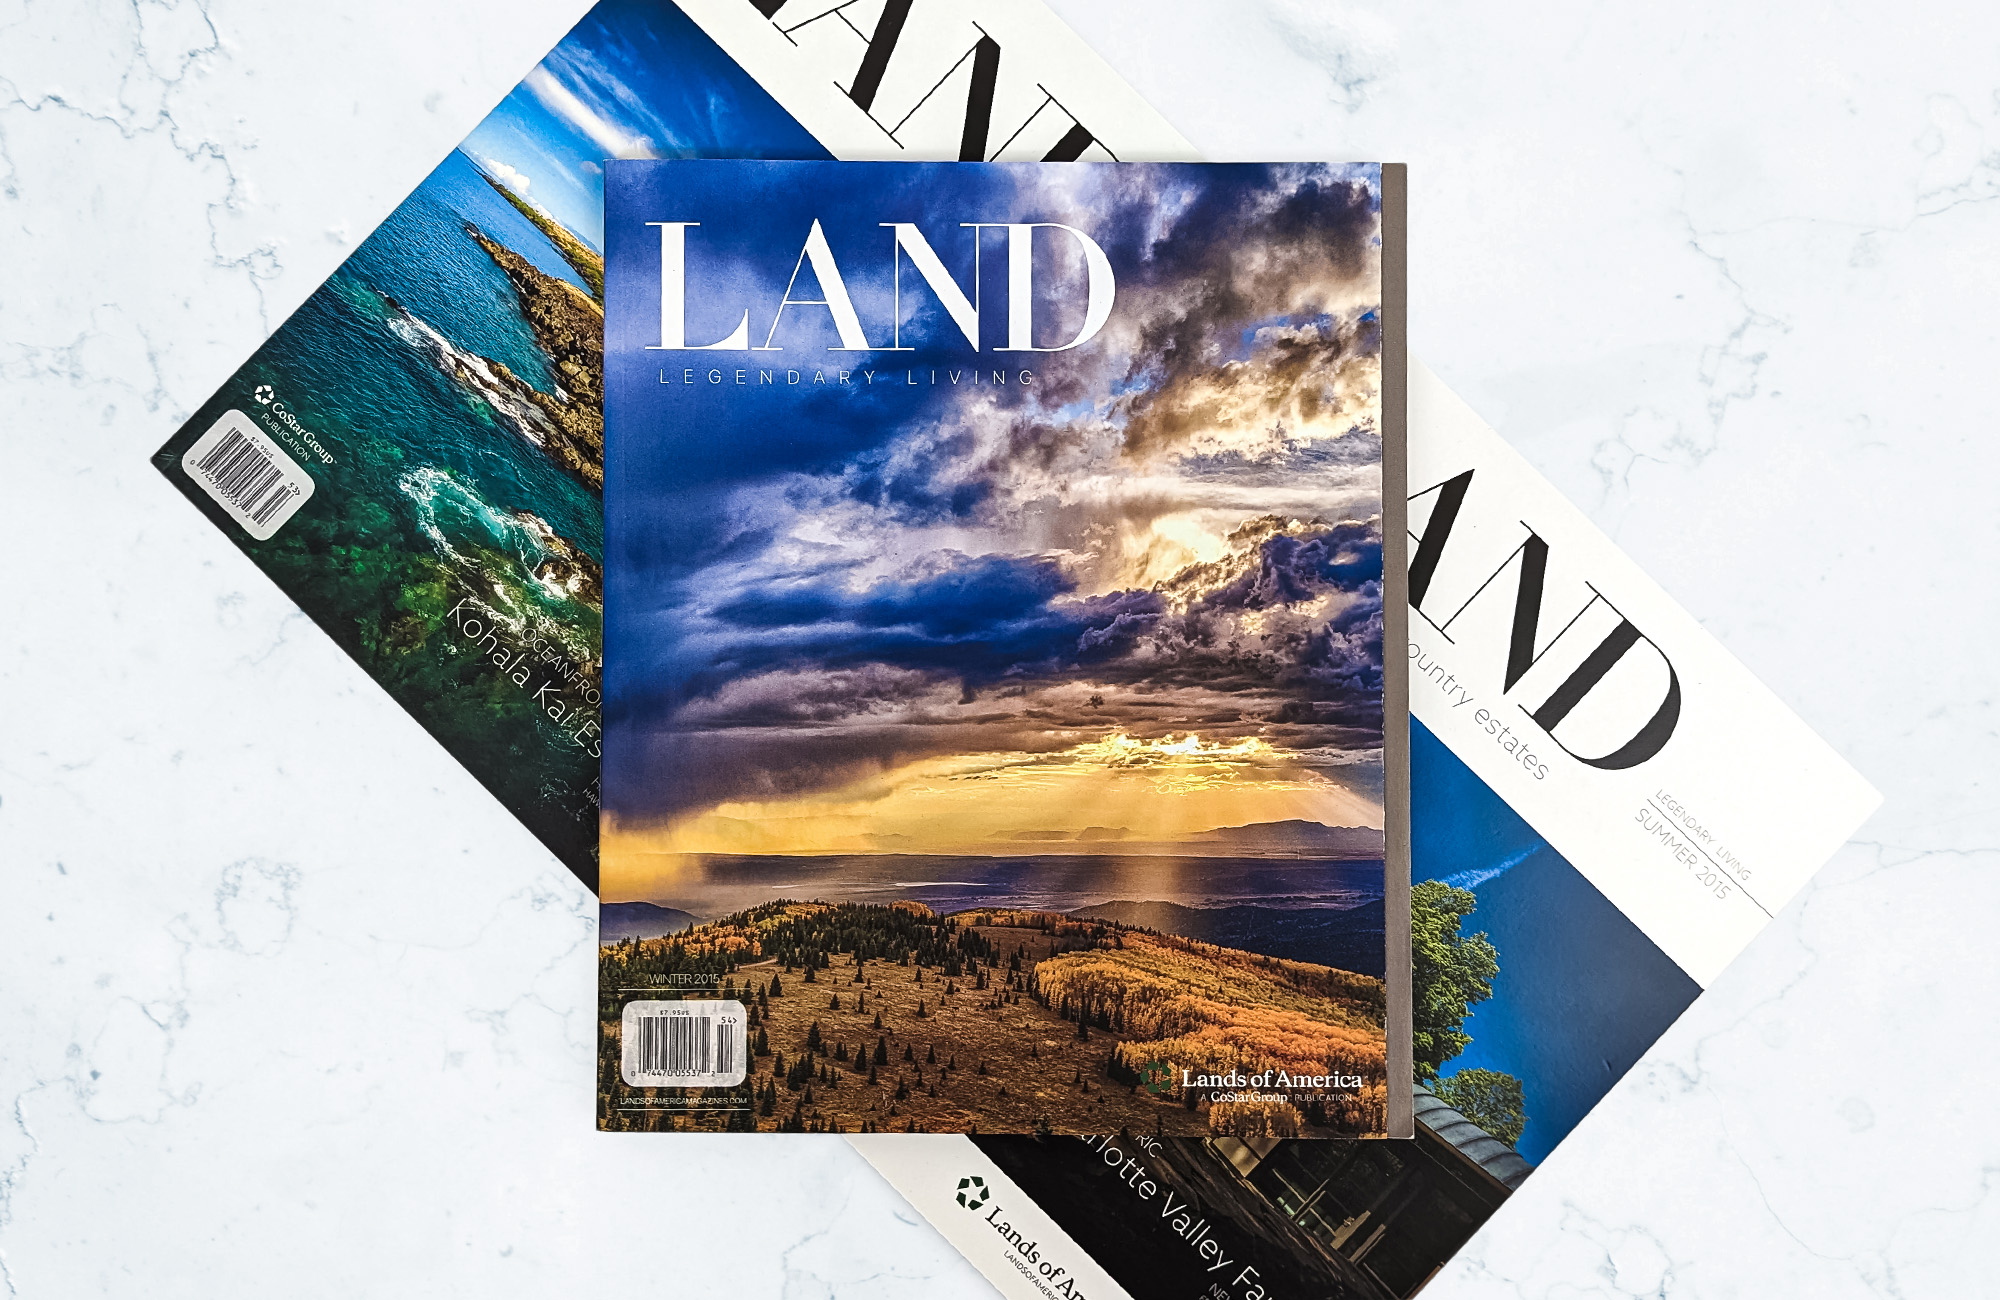 Three issues of LAND Magazine stacked on a marbled surface. The two magazines on the bottom are arranged diagonally and the one on top is parallel to the edge of the photo. The top magazine's cover depicts sunlight breaking through a cloudy sky and behind a mountain covered in trees. class=